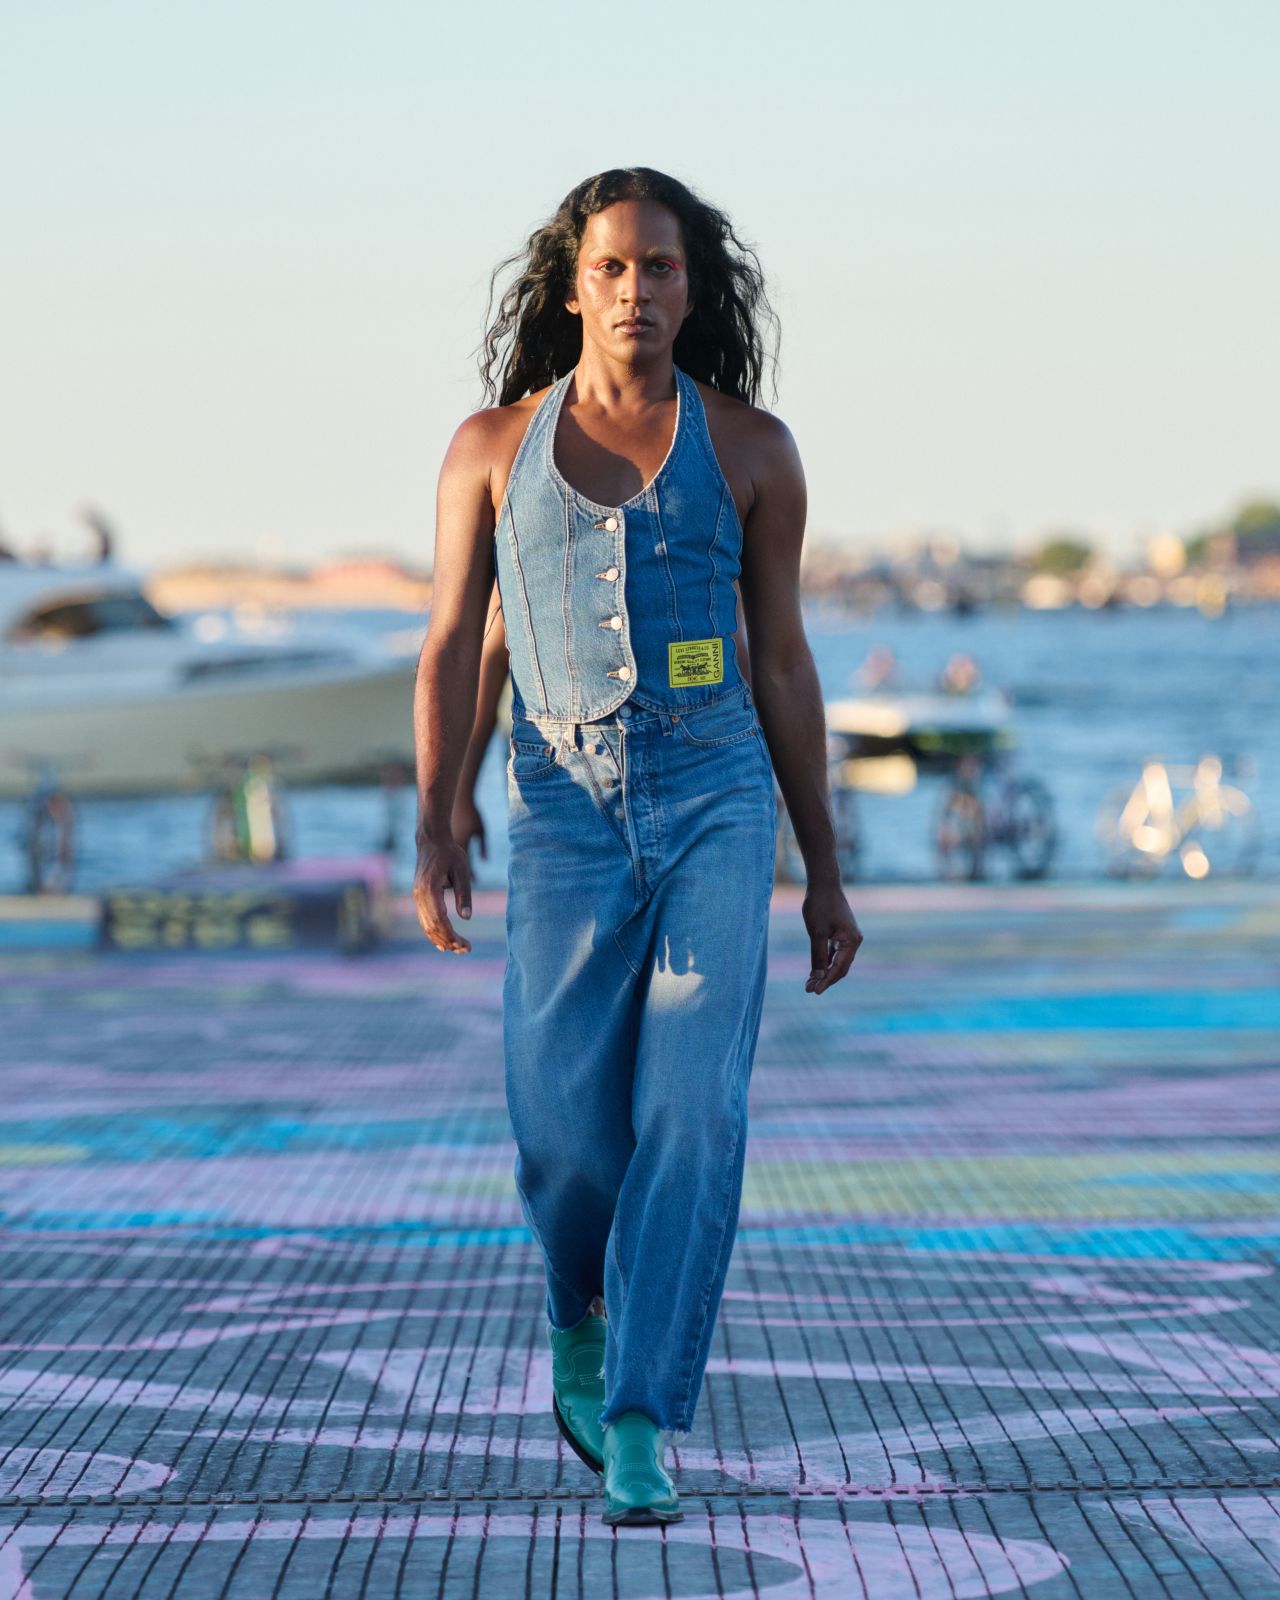 Non-binary model and activist Richie Shazam walked the runway in an all-denim look.